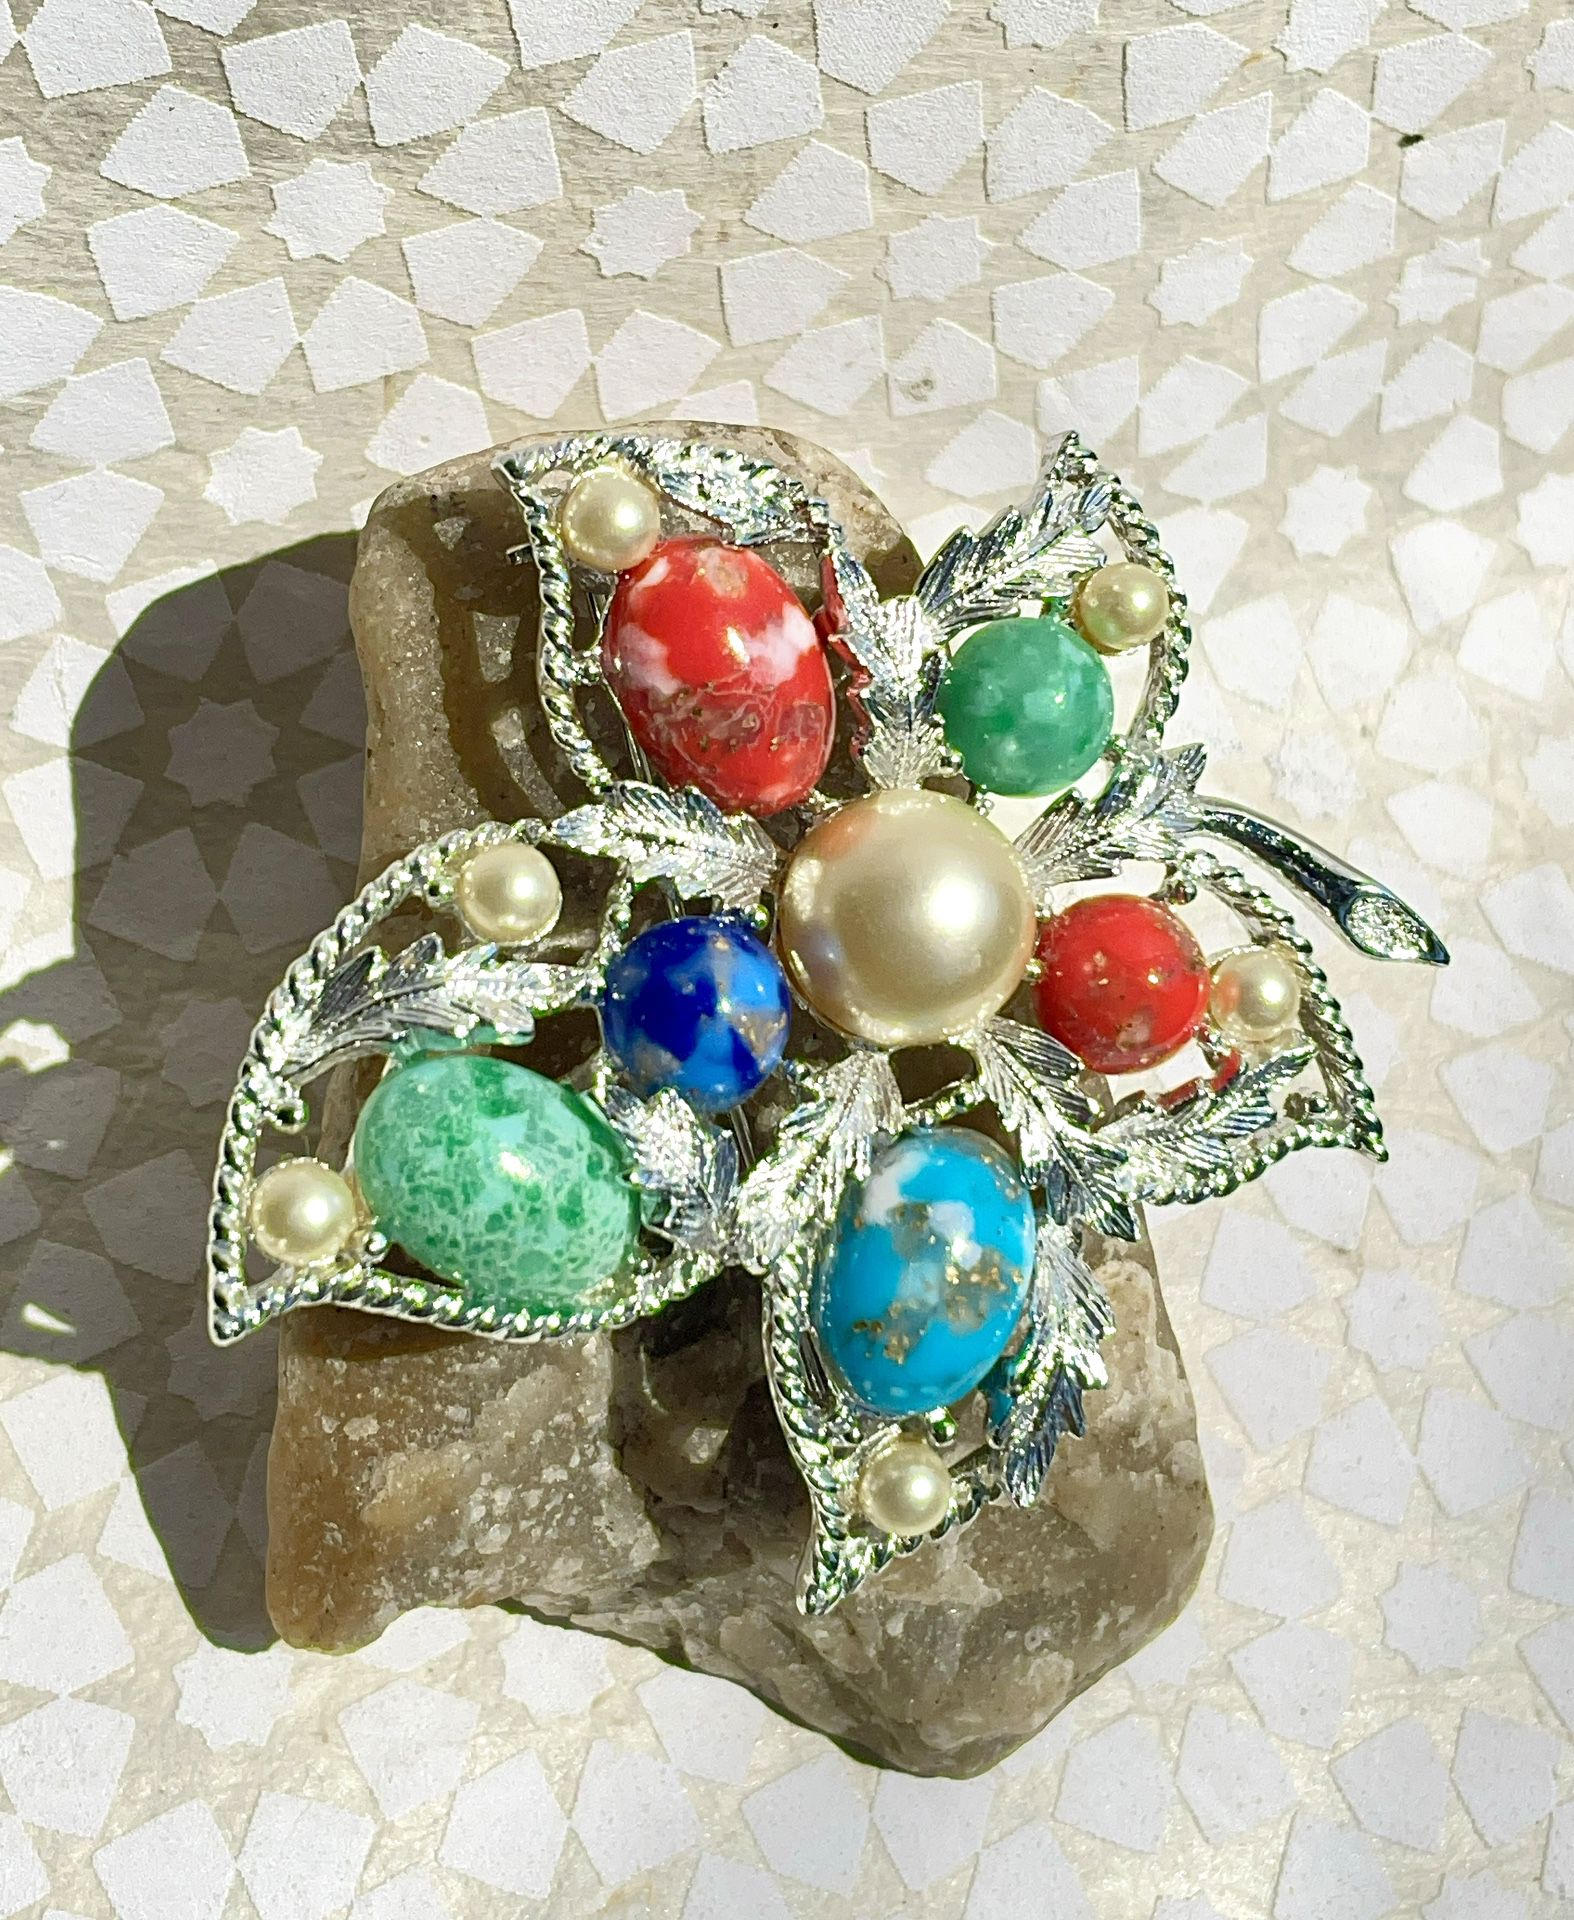 1967 Silver Sarah Conventry "Fantasy" Brooch featuring Faux Stone Cabochons and Pearls